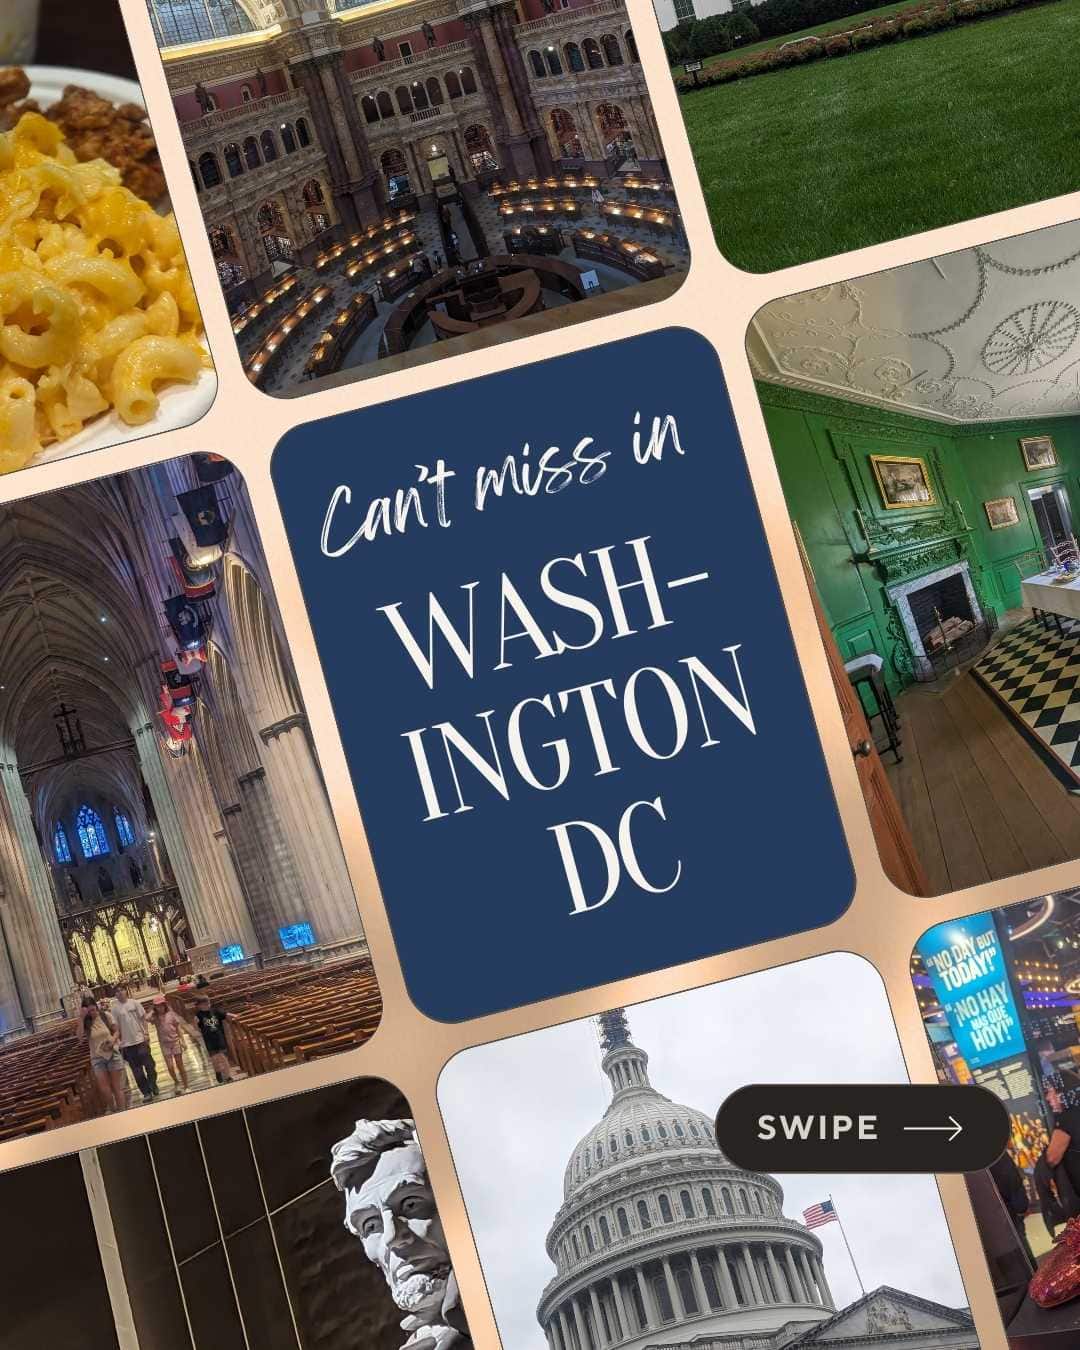 Unearth the less-traveled paths and secret spots of Washington DC with me! Get an insider's peek at charming neighborhoods, historical treasures, quaint eateries, and awe-inspiring art scenes. These beloved locations offer a unique taste of the city's vibrant culture and rich history. Discover DC like never before! via @pullingcurls